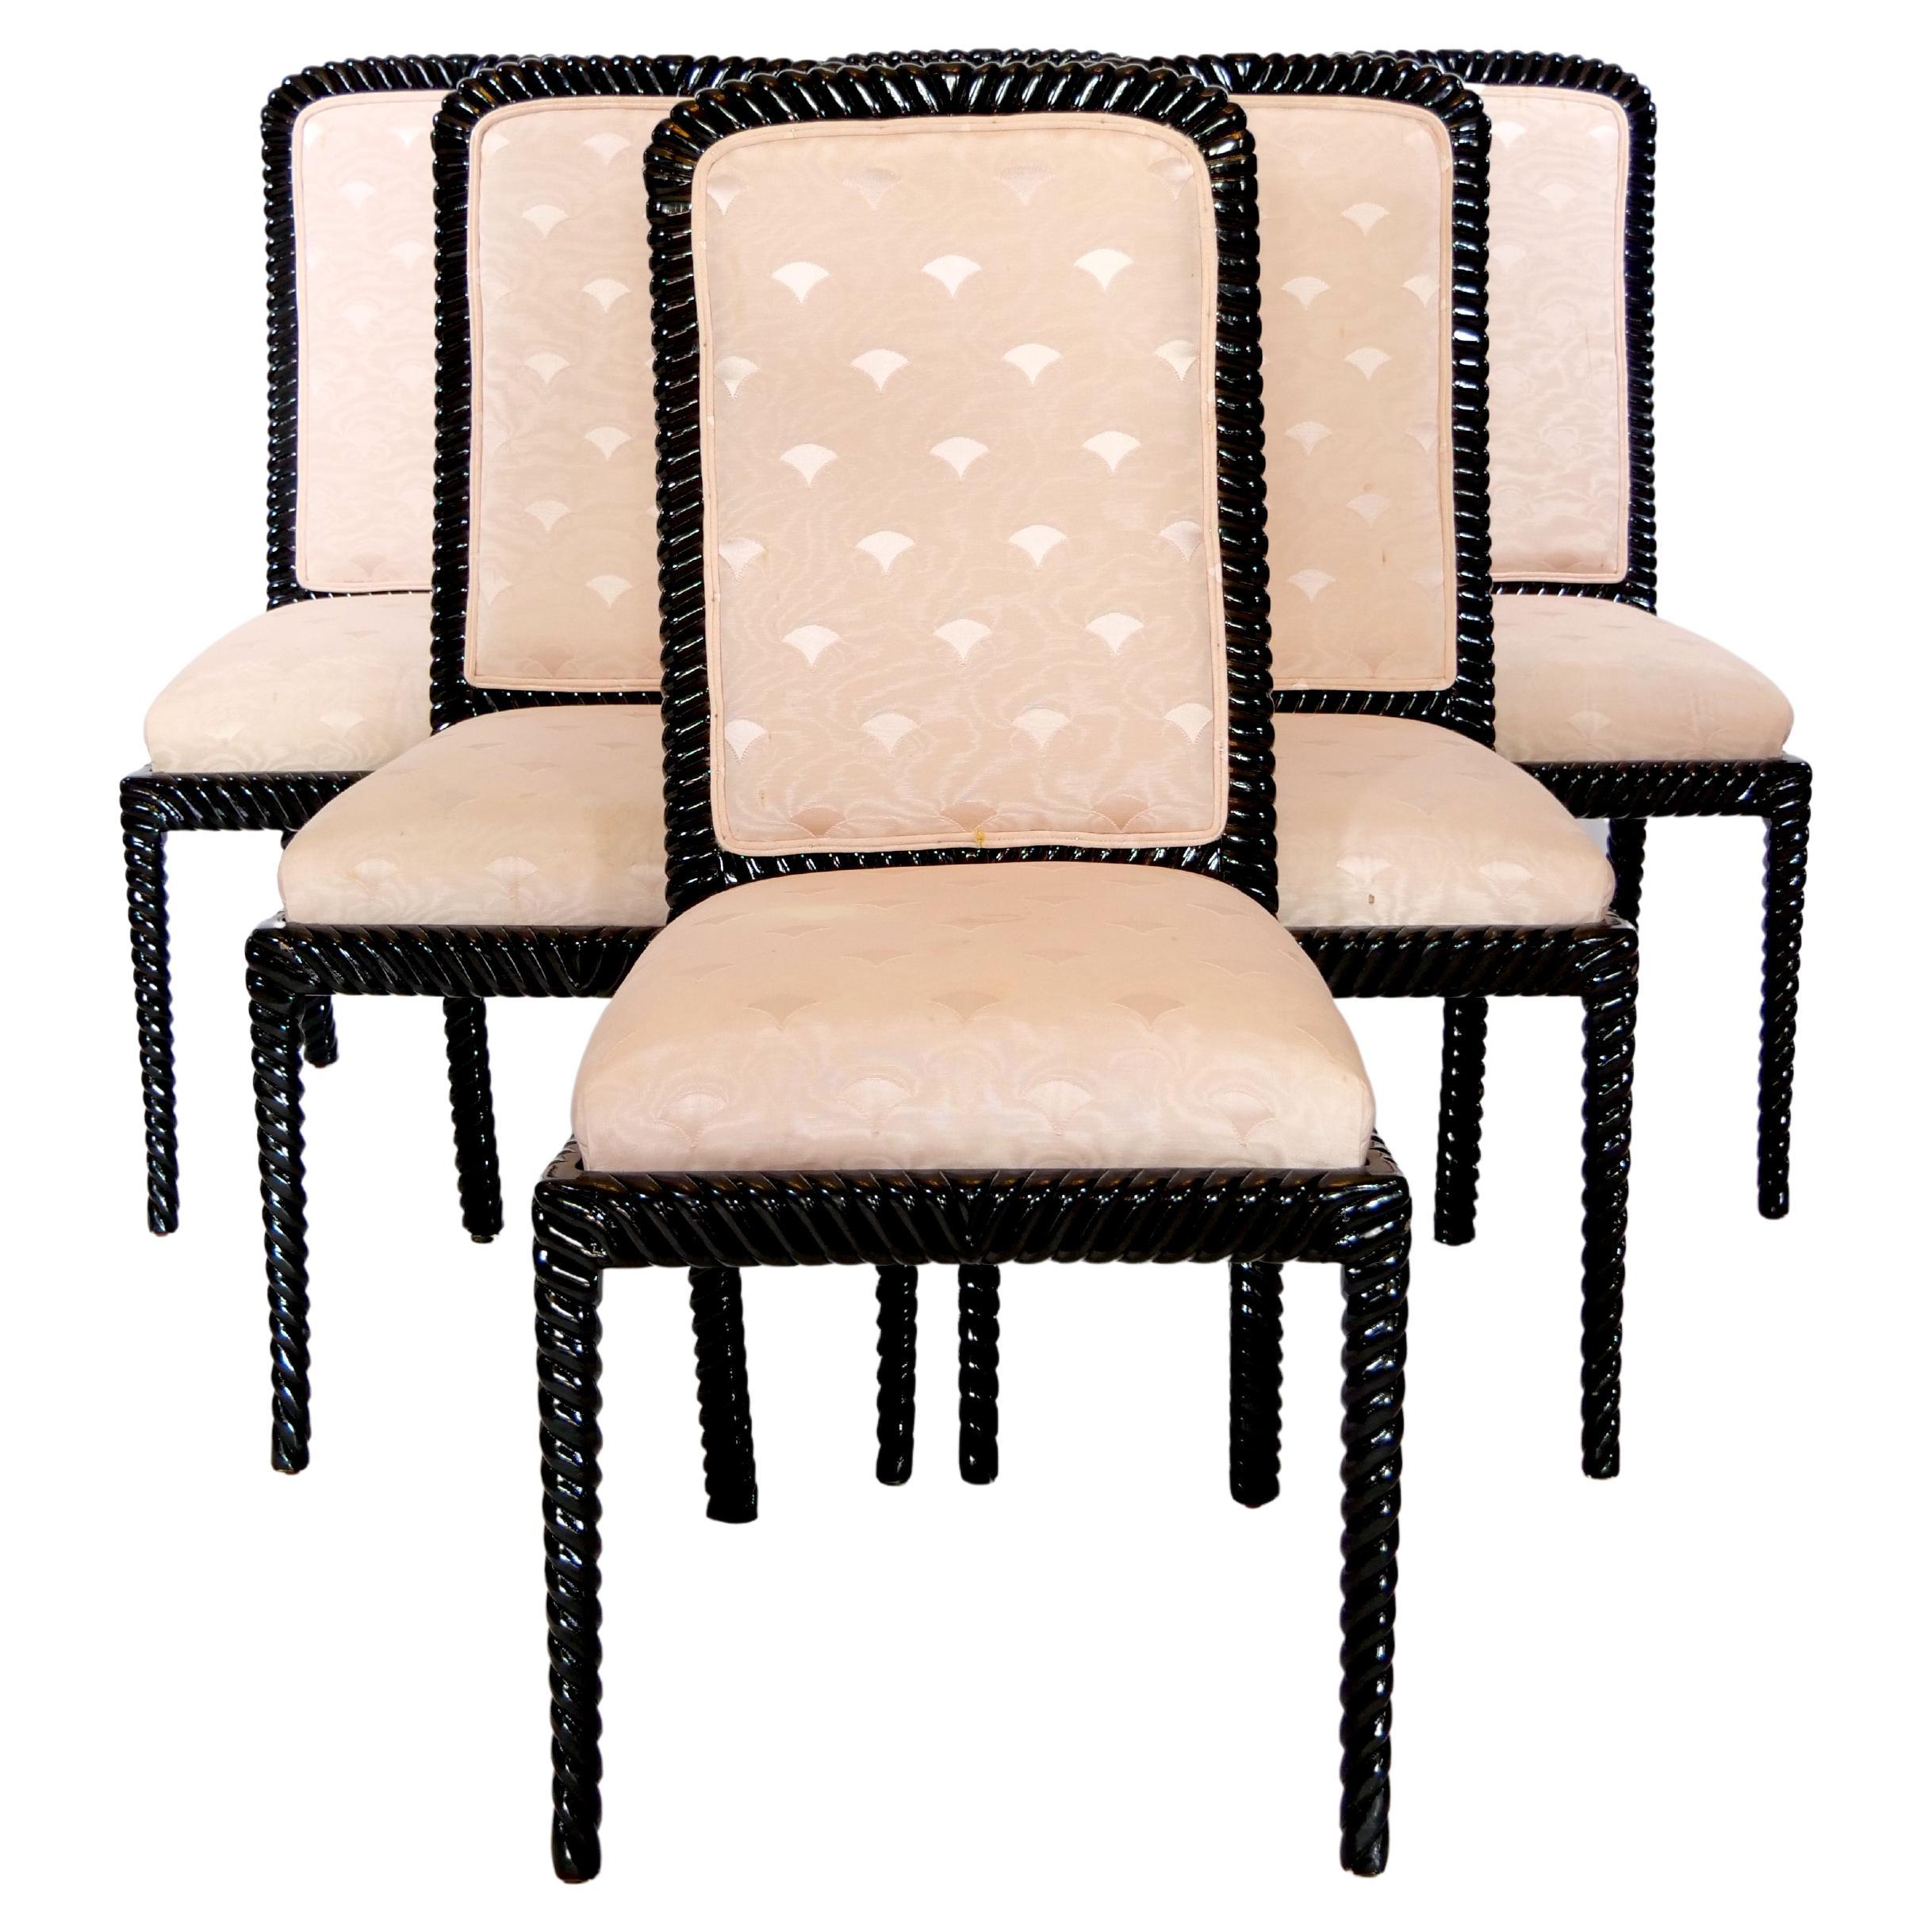 Beautiful Mid-Century Modern black lacquered twist rope frame set of eight dining chairs with a salmon colored upholstery. The set consist of six side dining chairs with two armchairs. Each chair is in great vintage condition with minor wear